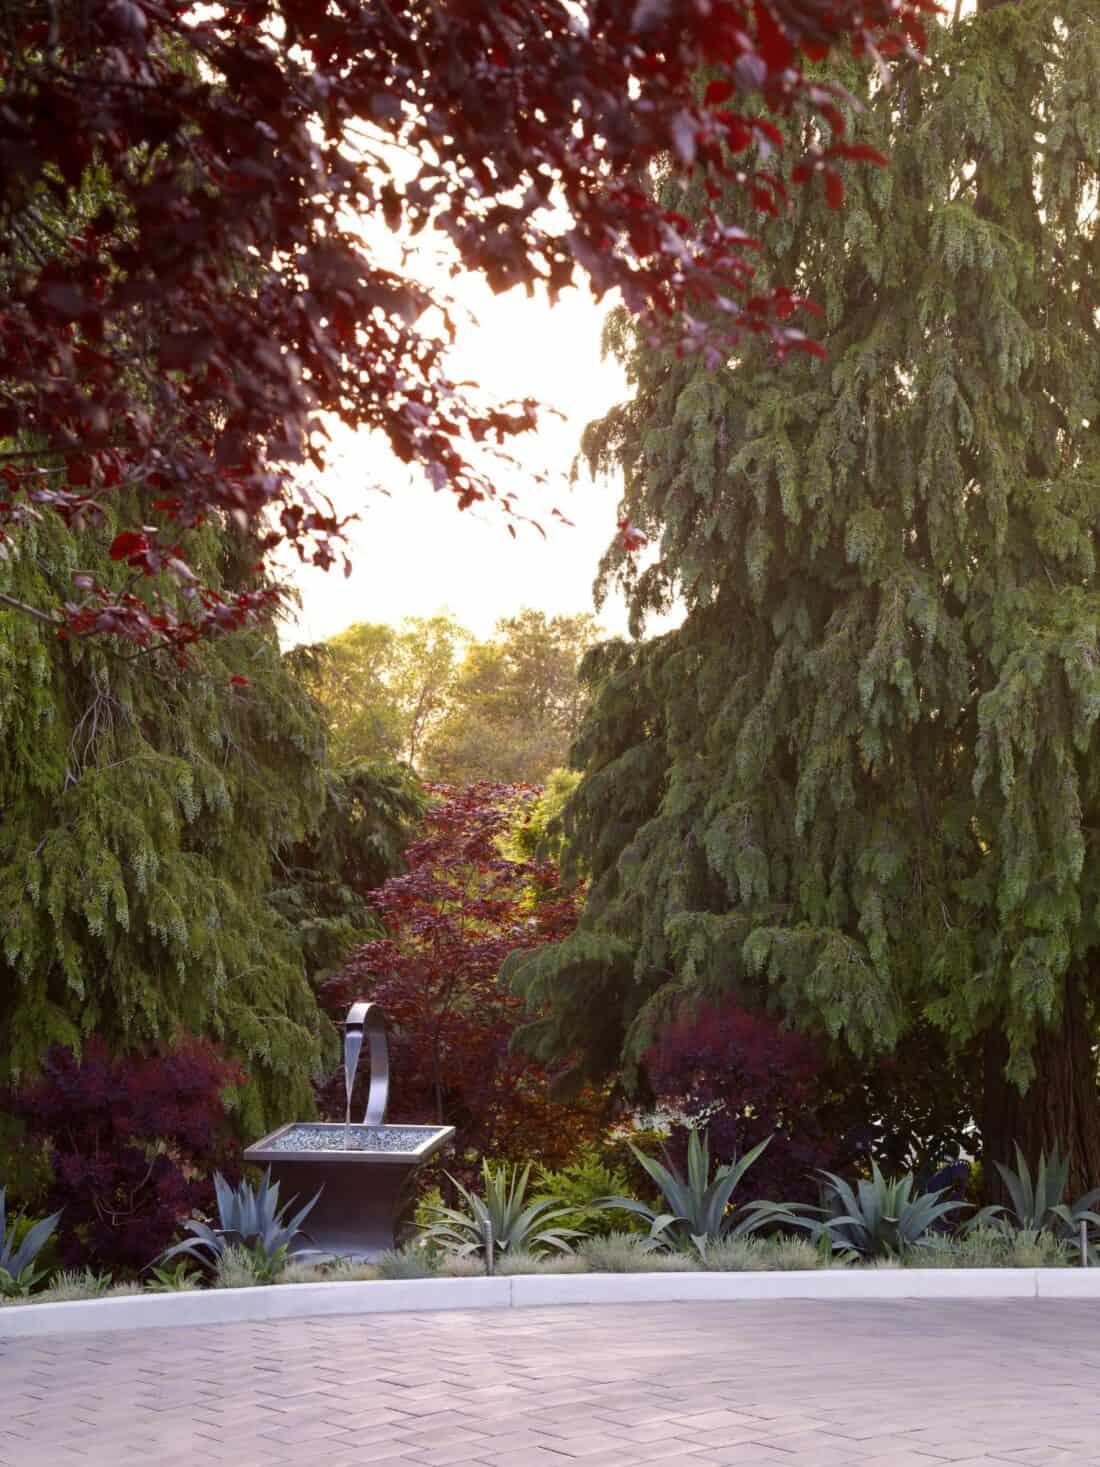 A tranquil garden scene at the Garden Gallery in Los Gatos features a sundial sculpture surrounded by lush greenery, tall trees, and vibrant plants. The sun's warm light filters through the canopy, creating a serene and inviting atmosphere.